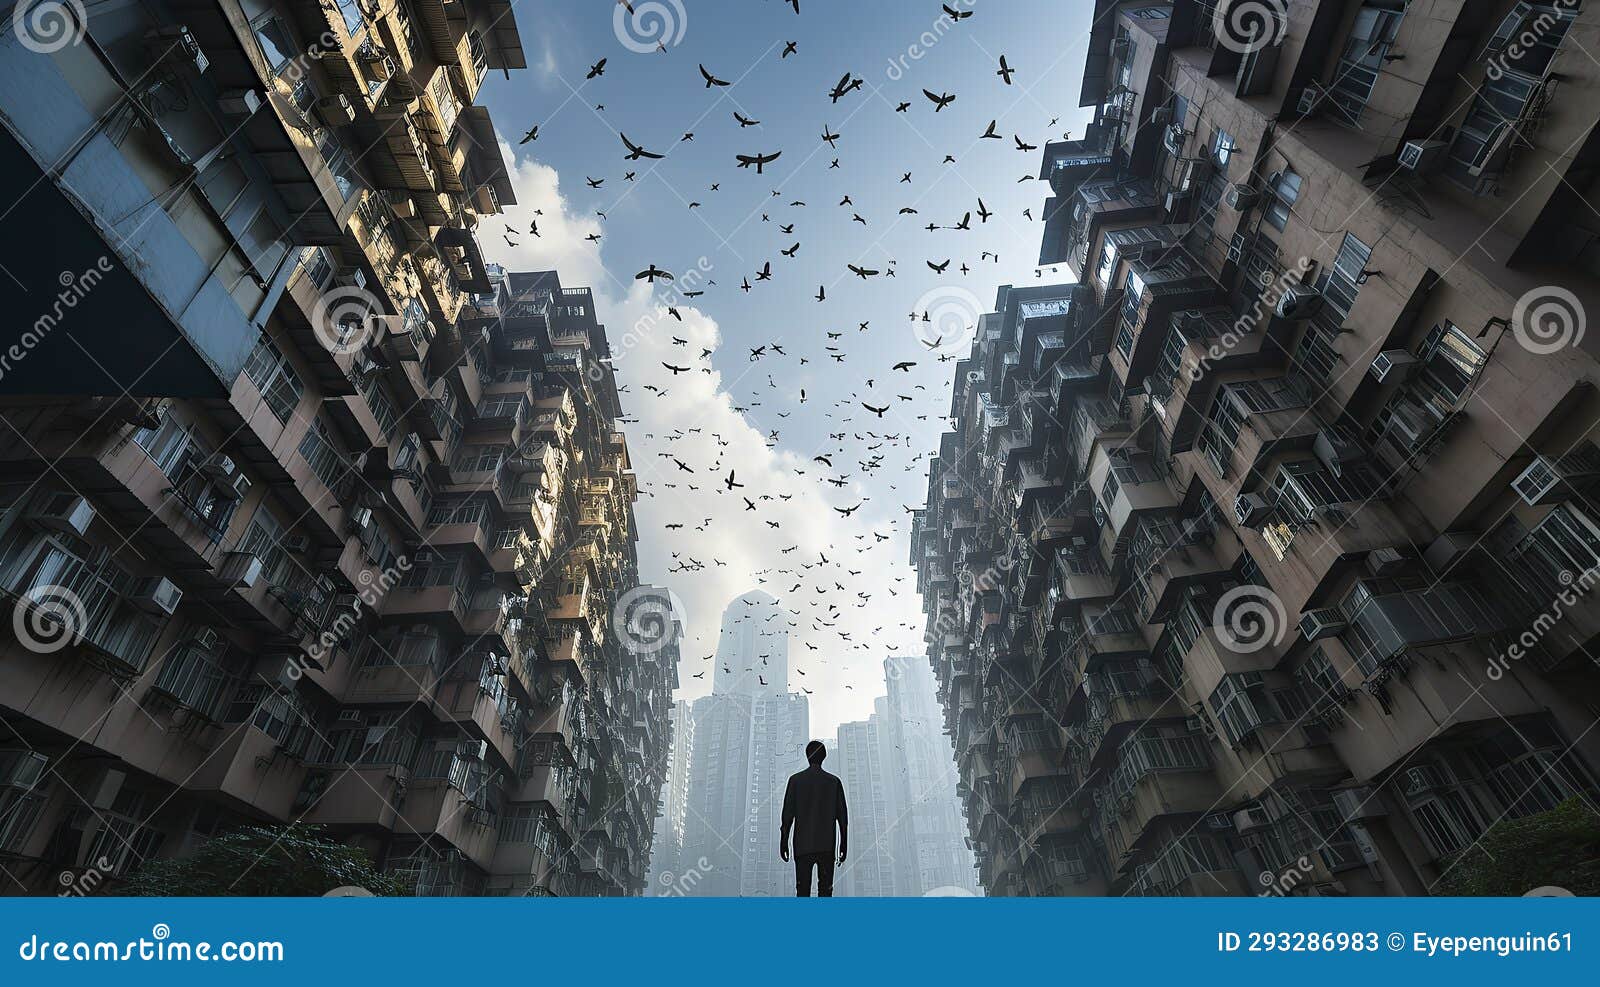 man in the city looks at a group of birds flaying